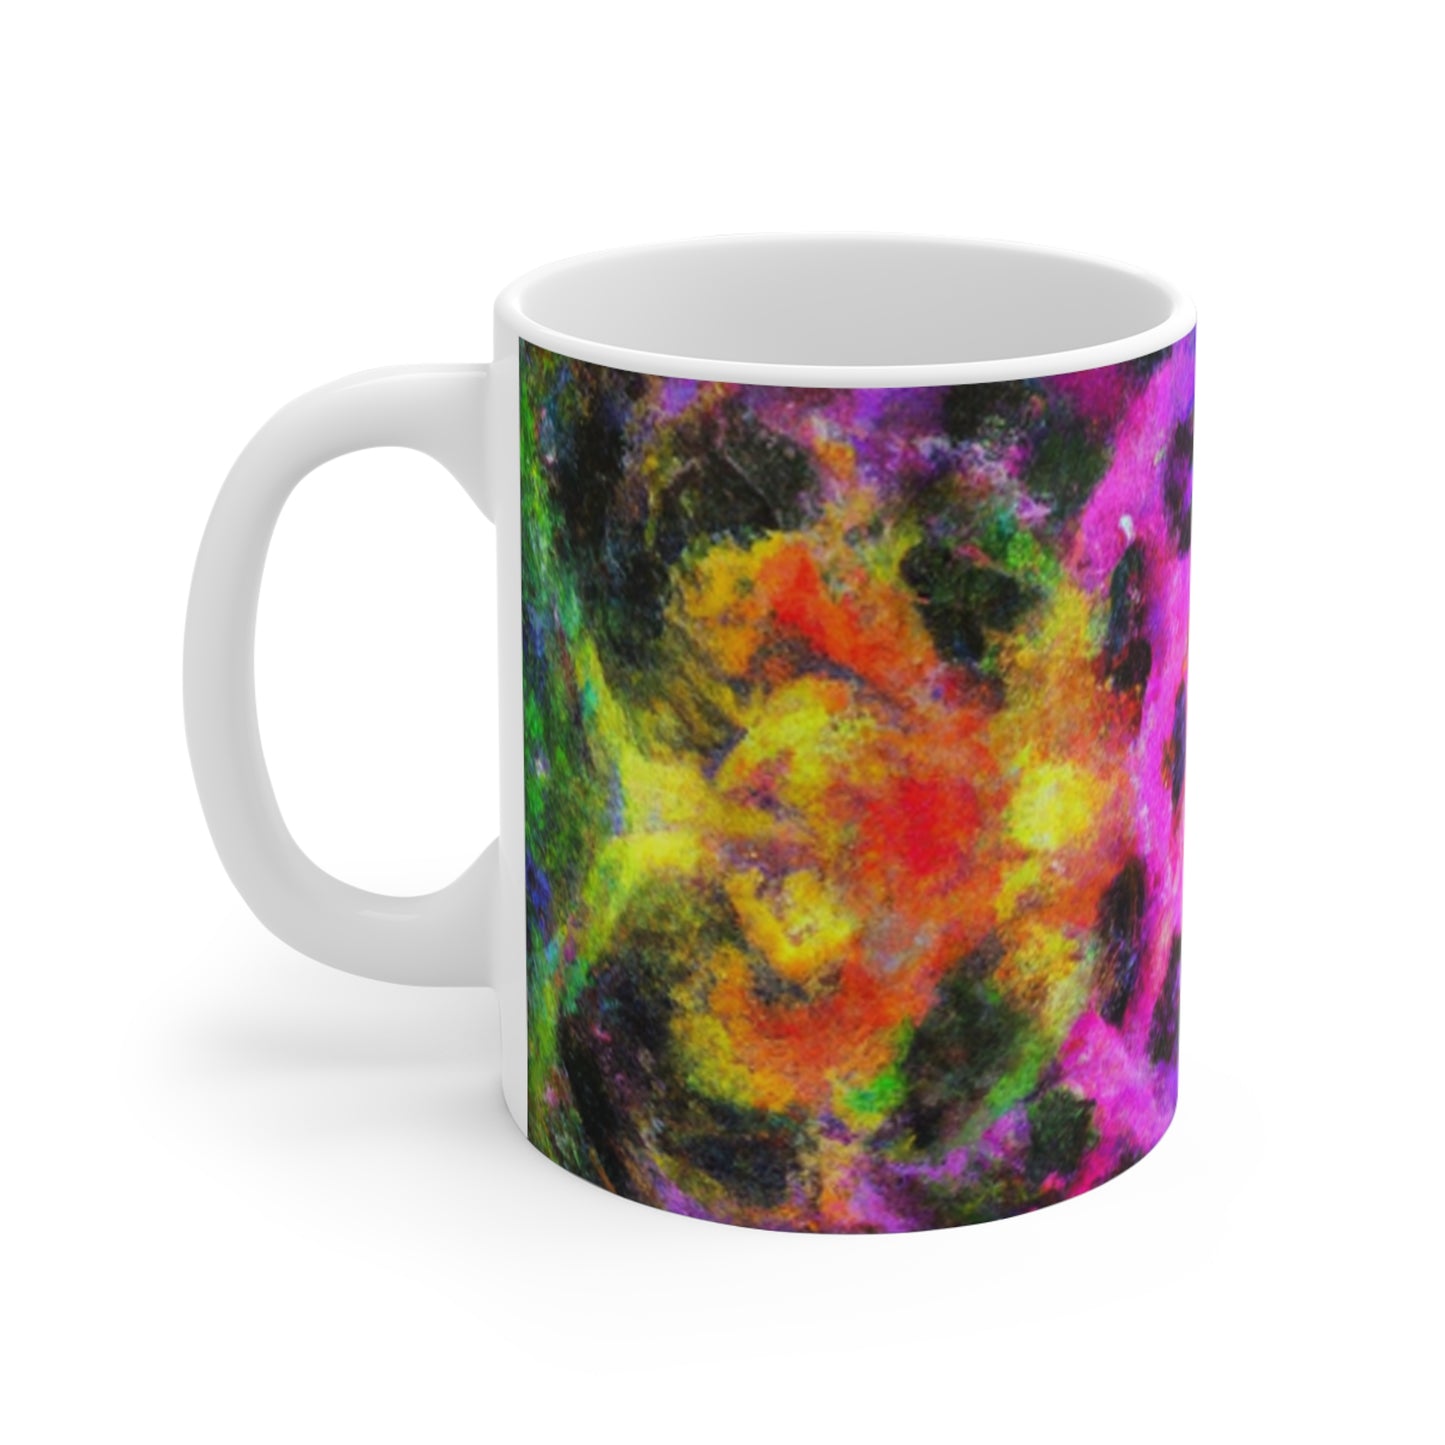 Maybelle's Morning Blend Coffee - Psychedelic Coffee Cup Mug 11 Ounce